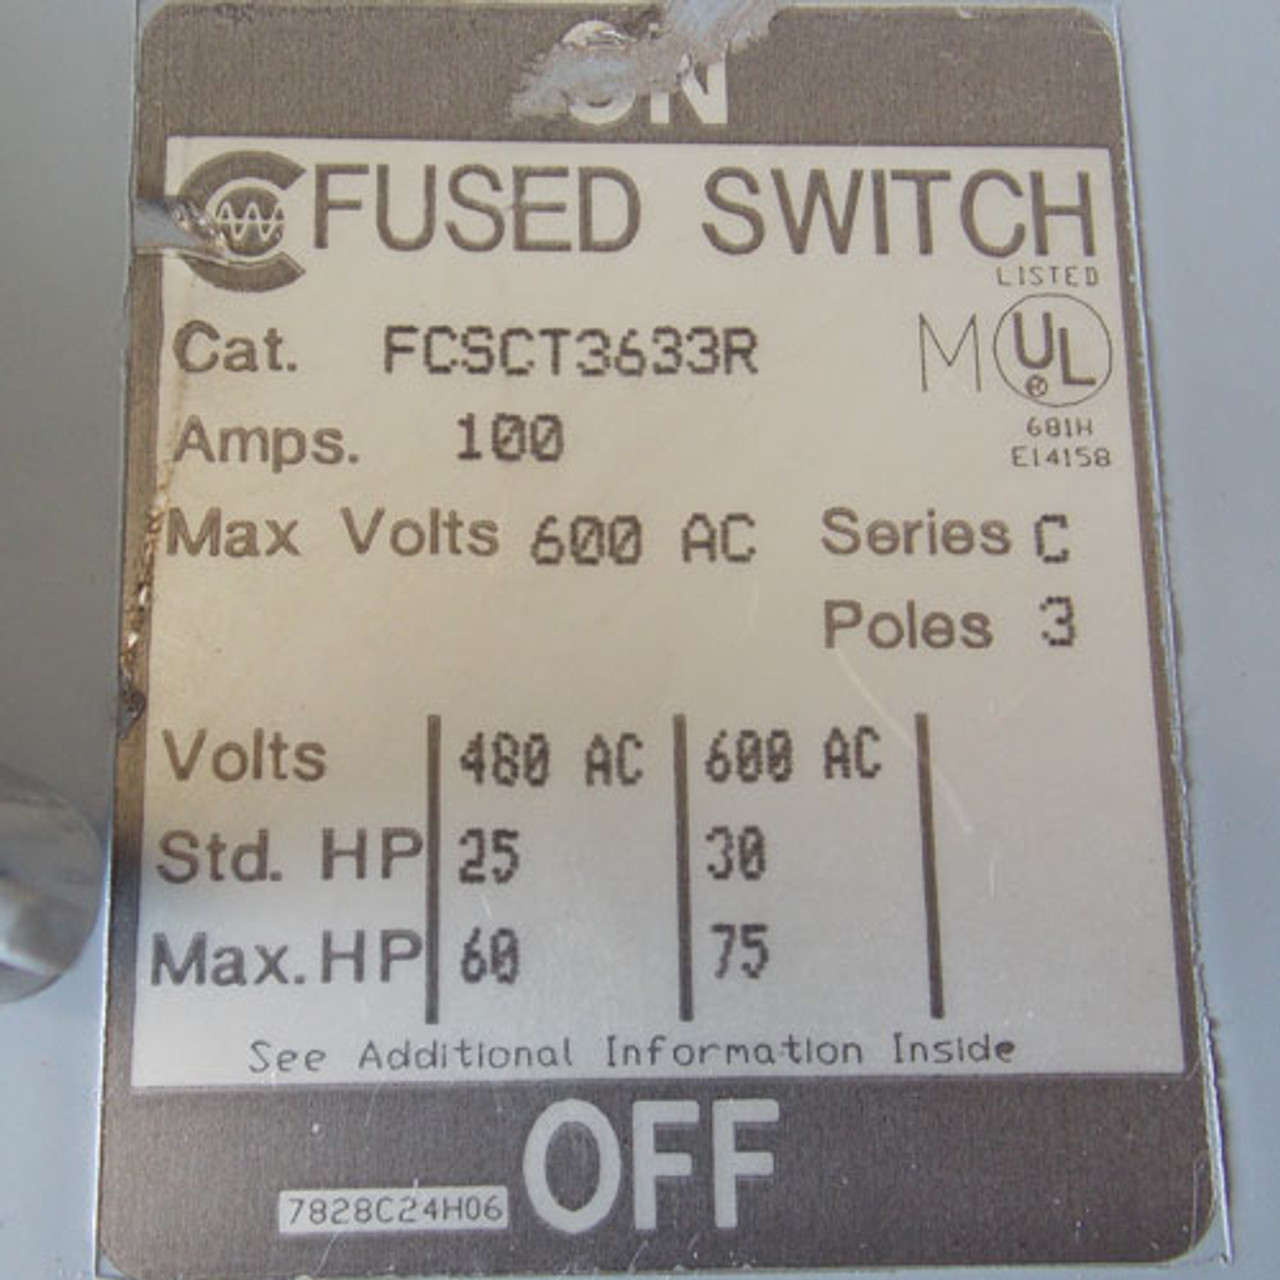 Challenger FCSCT3633R 100 Amp 3PH 600V Fusible Twin Panel Switch - Reconditioned